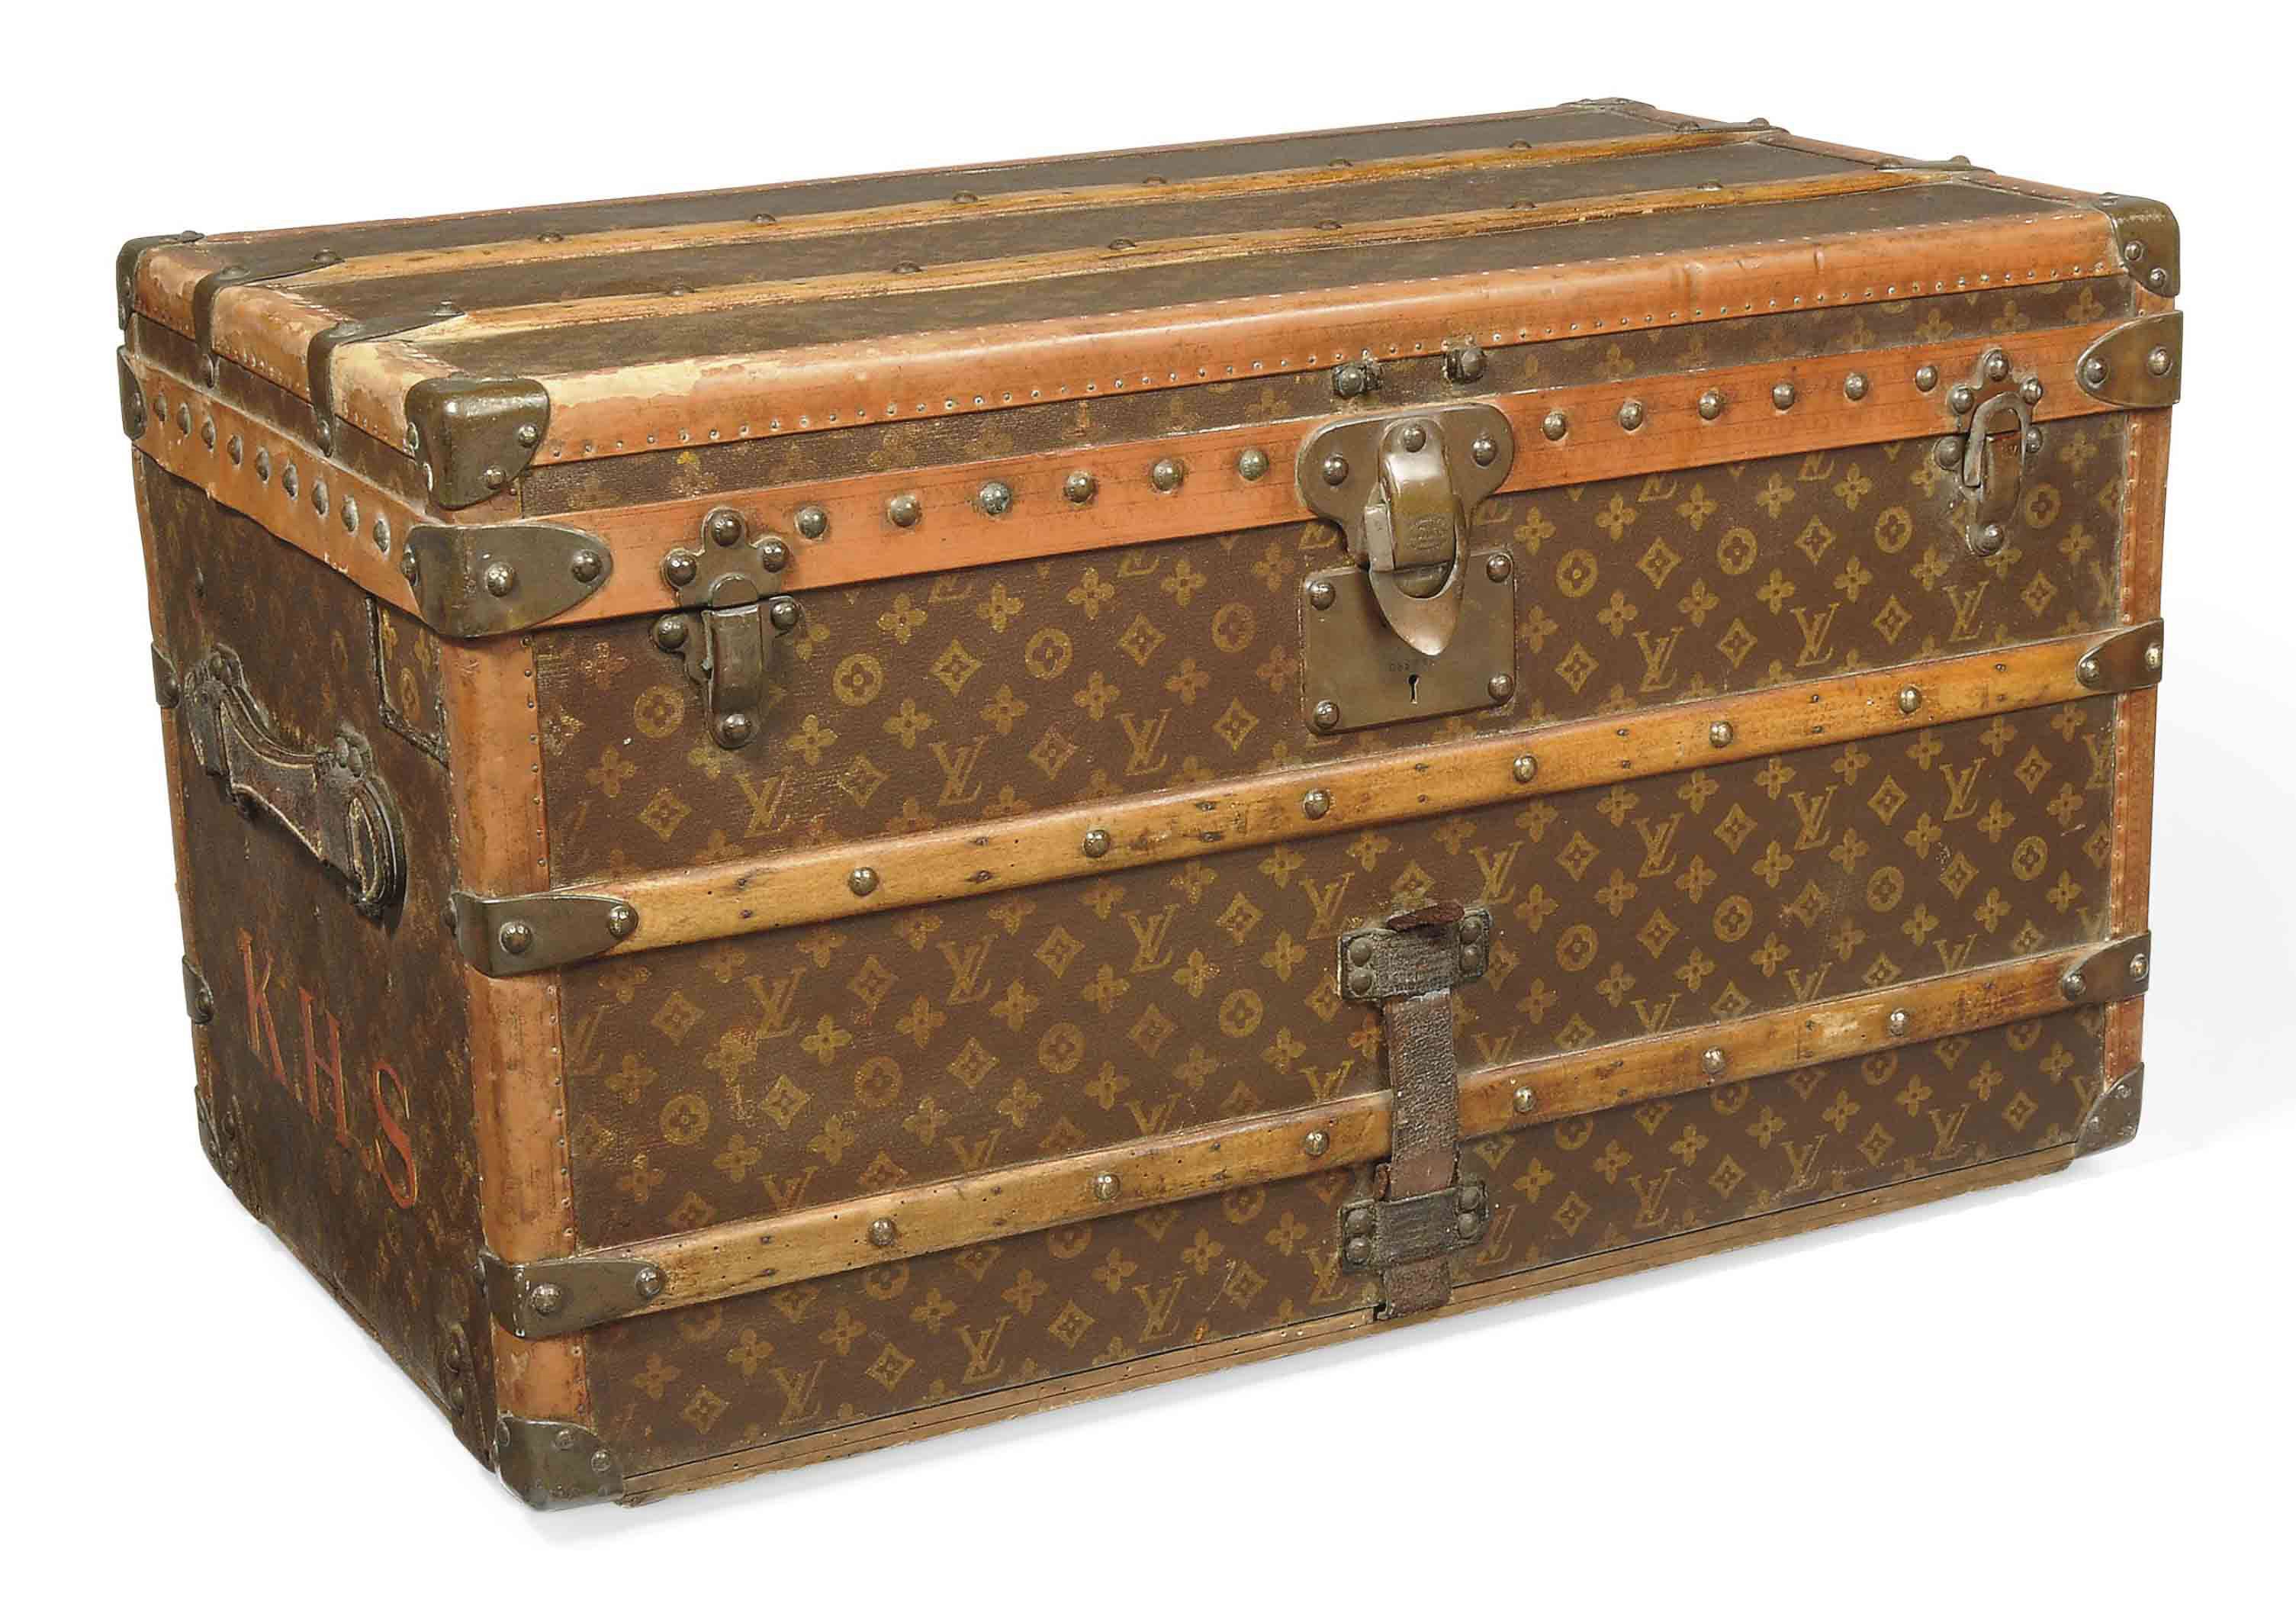 Sold at Auction: A travel trunk by Louis Vuitton, first half 20th century.